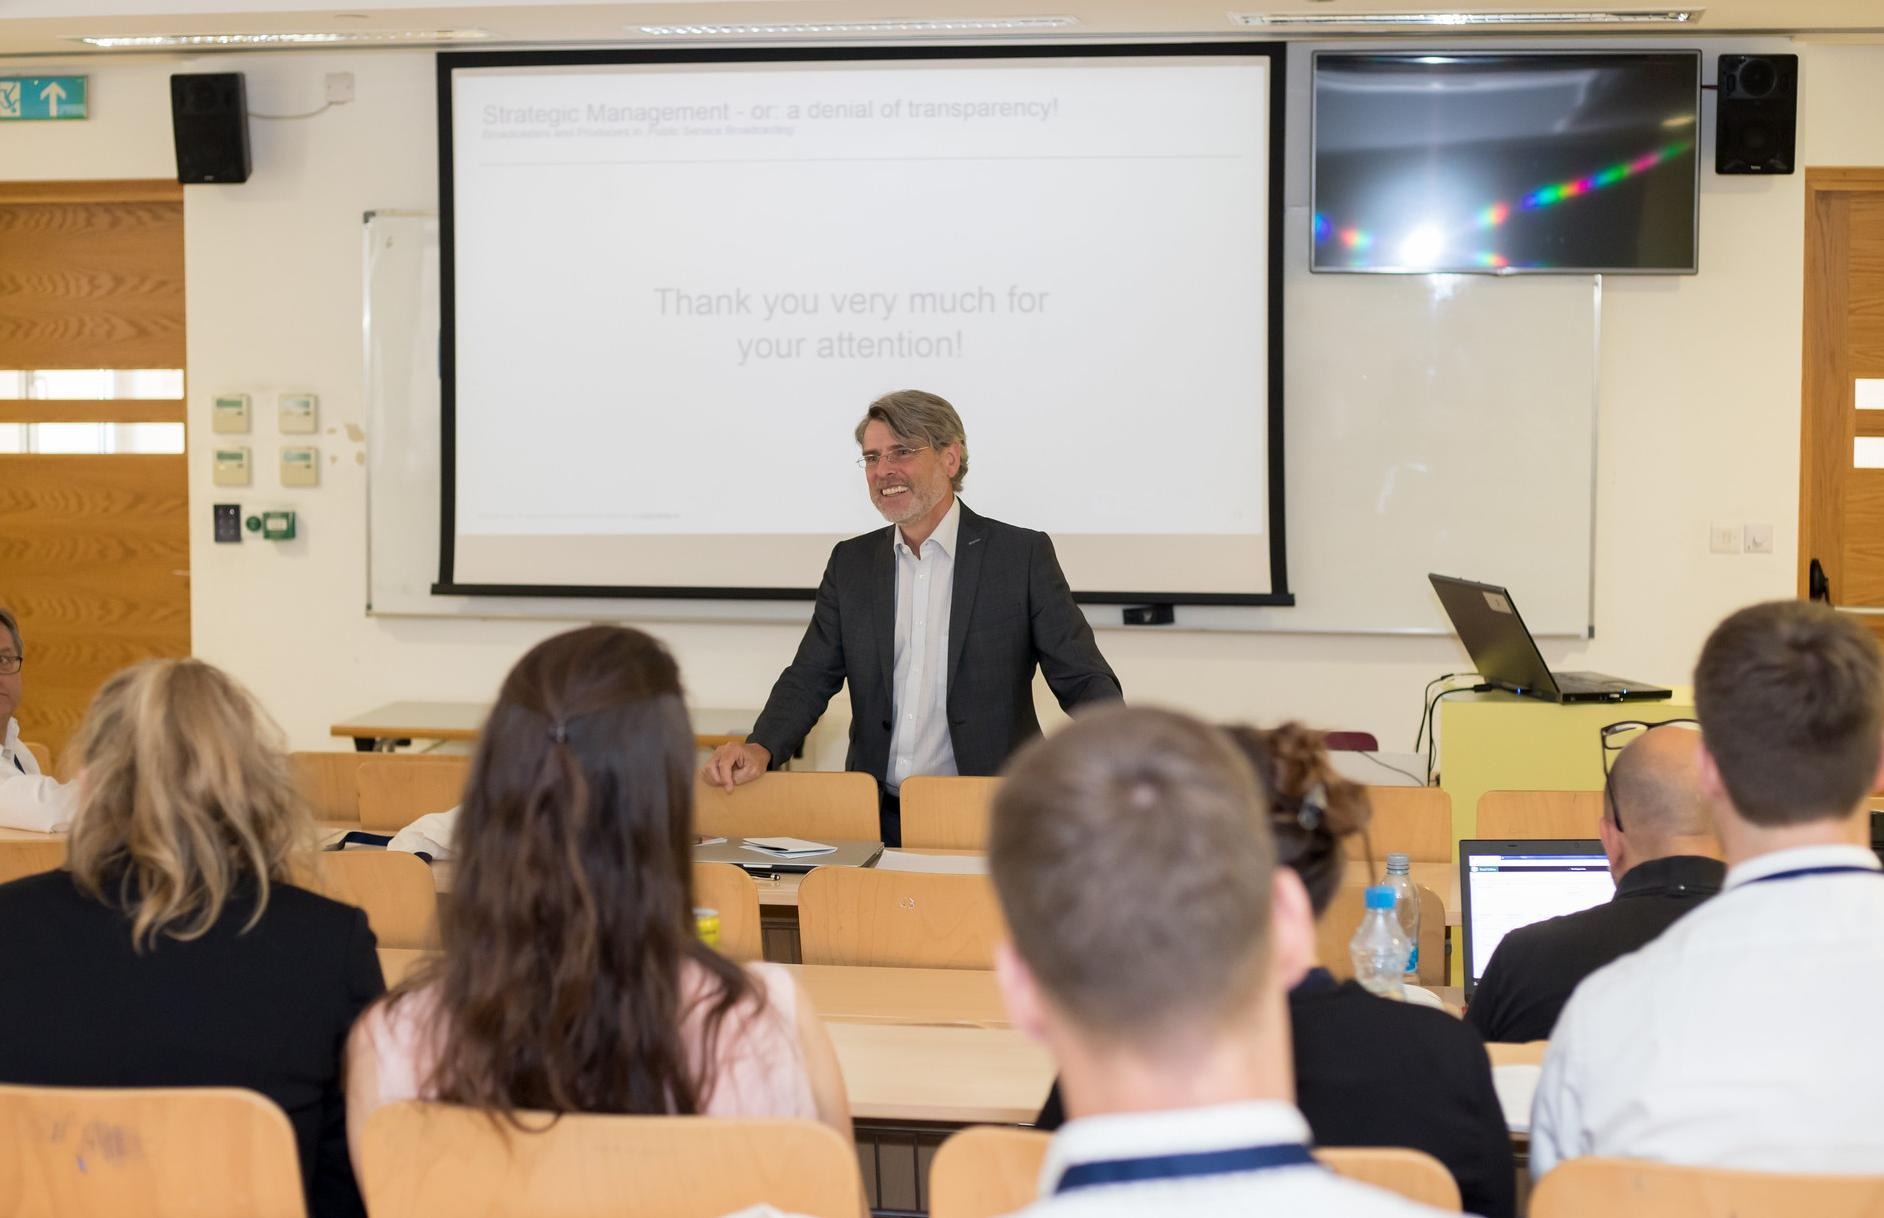 A male reseacher stands in front of a presentation screen in a lecture room. He is presenting to an audience who are sitting in rows with their backs to us. 